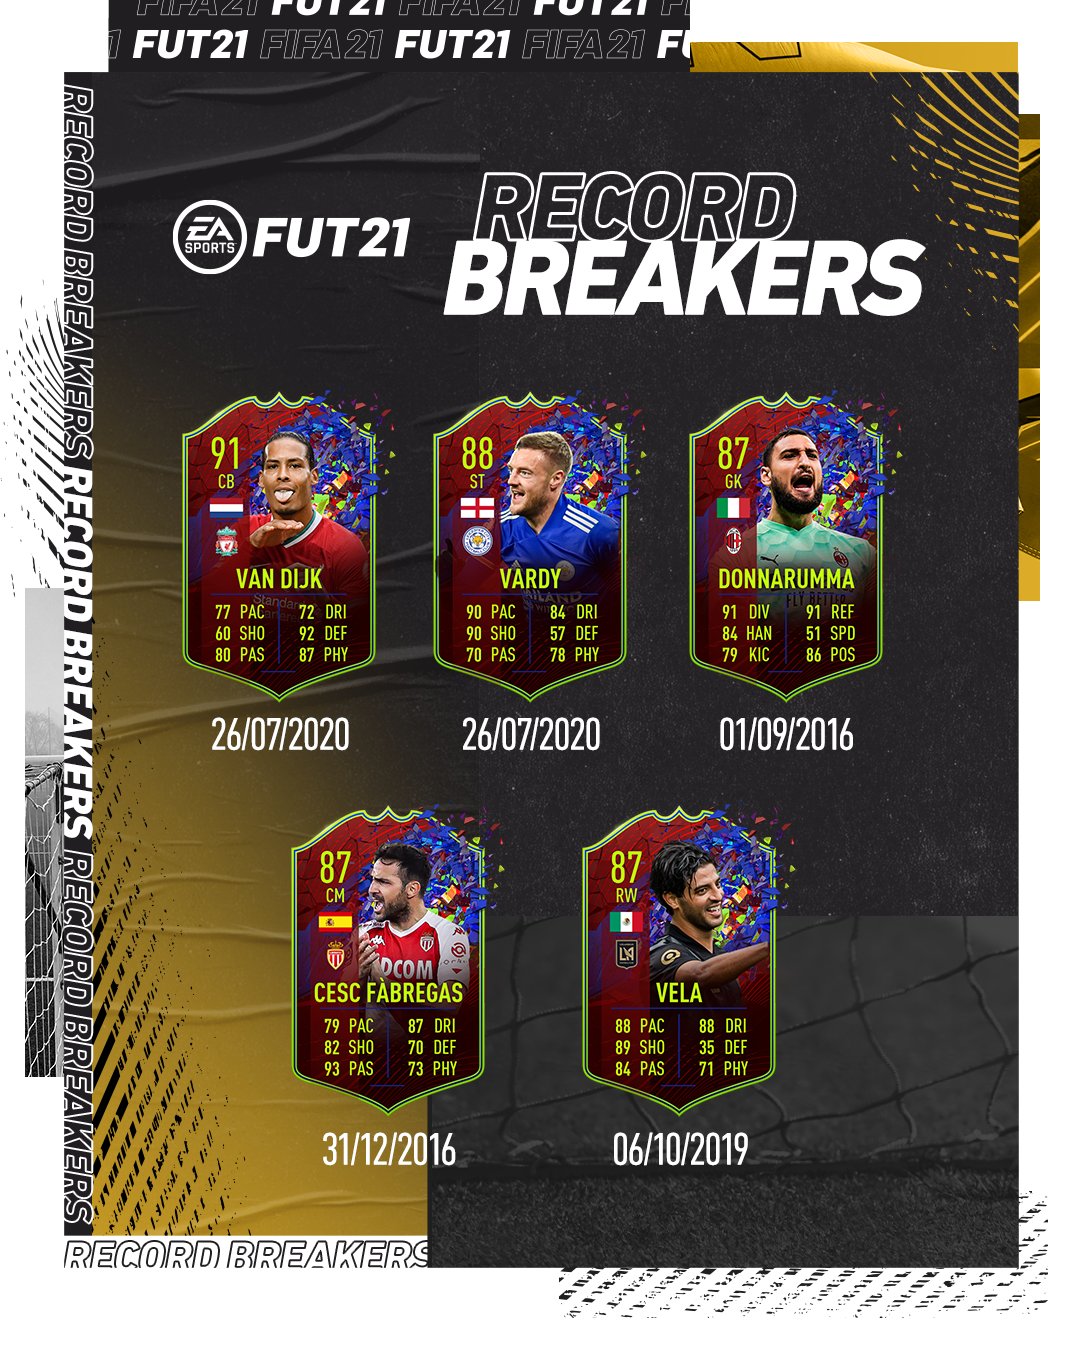 5 New Record Breaker Promo Cards Added To FIFA 21, Including A 91 Rated Van Dijk